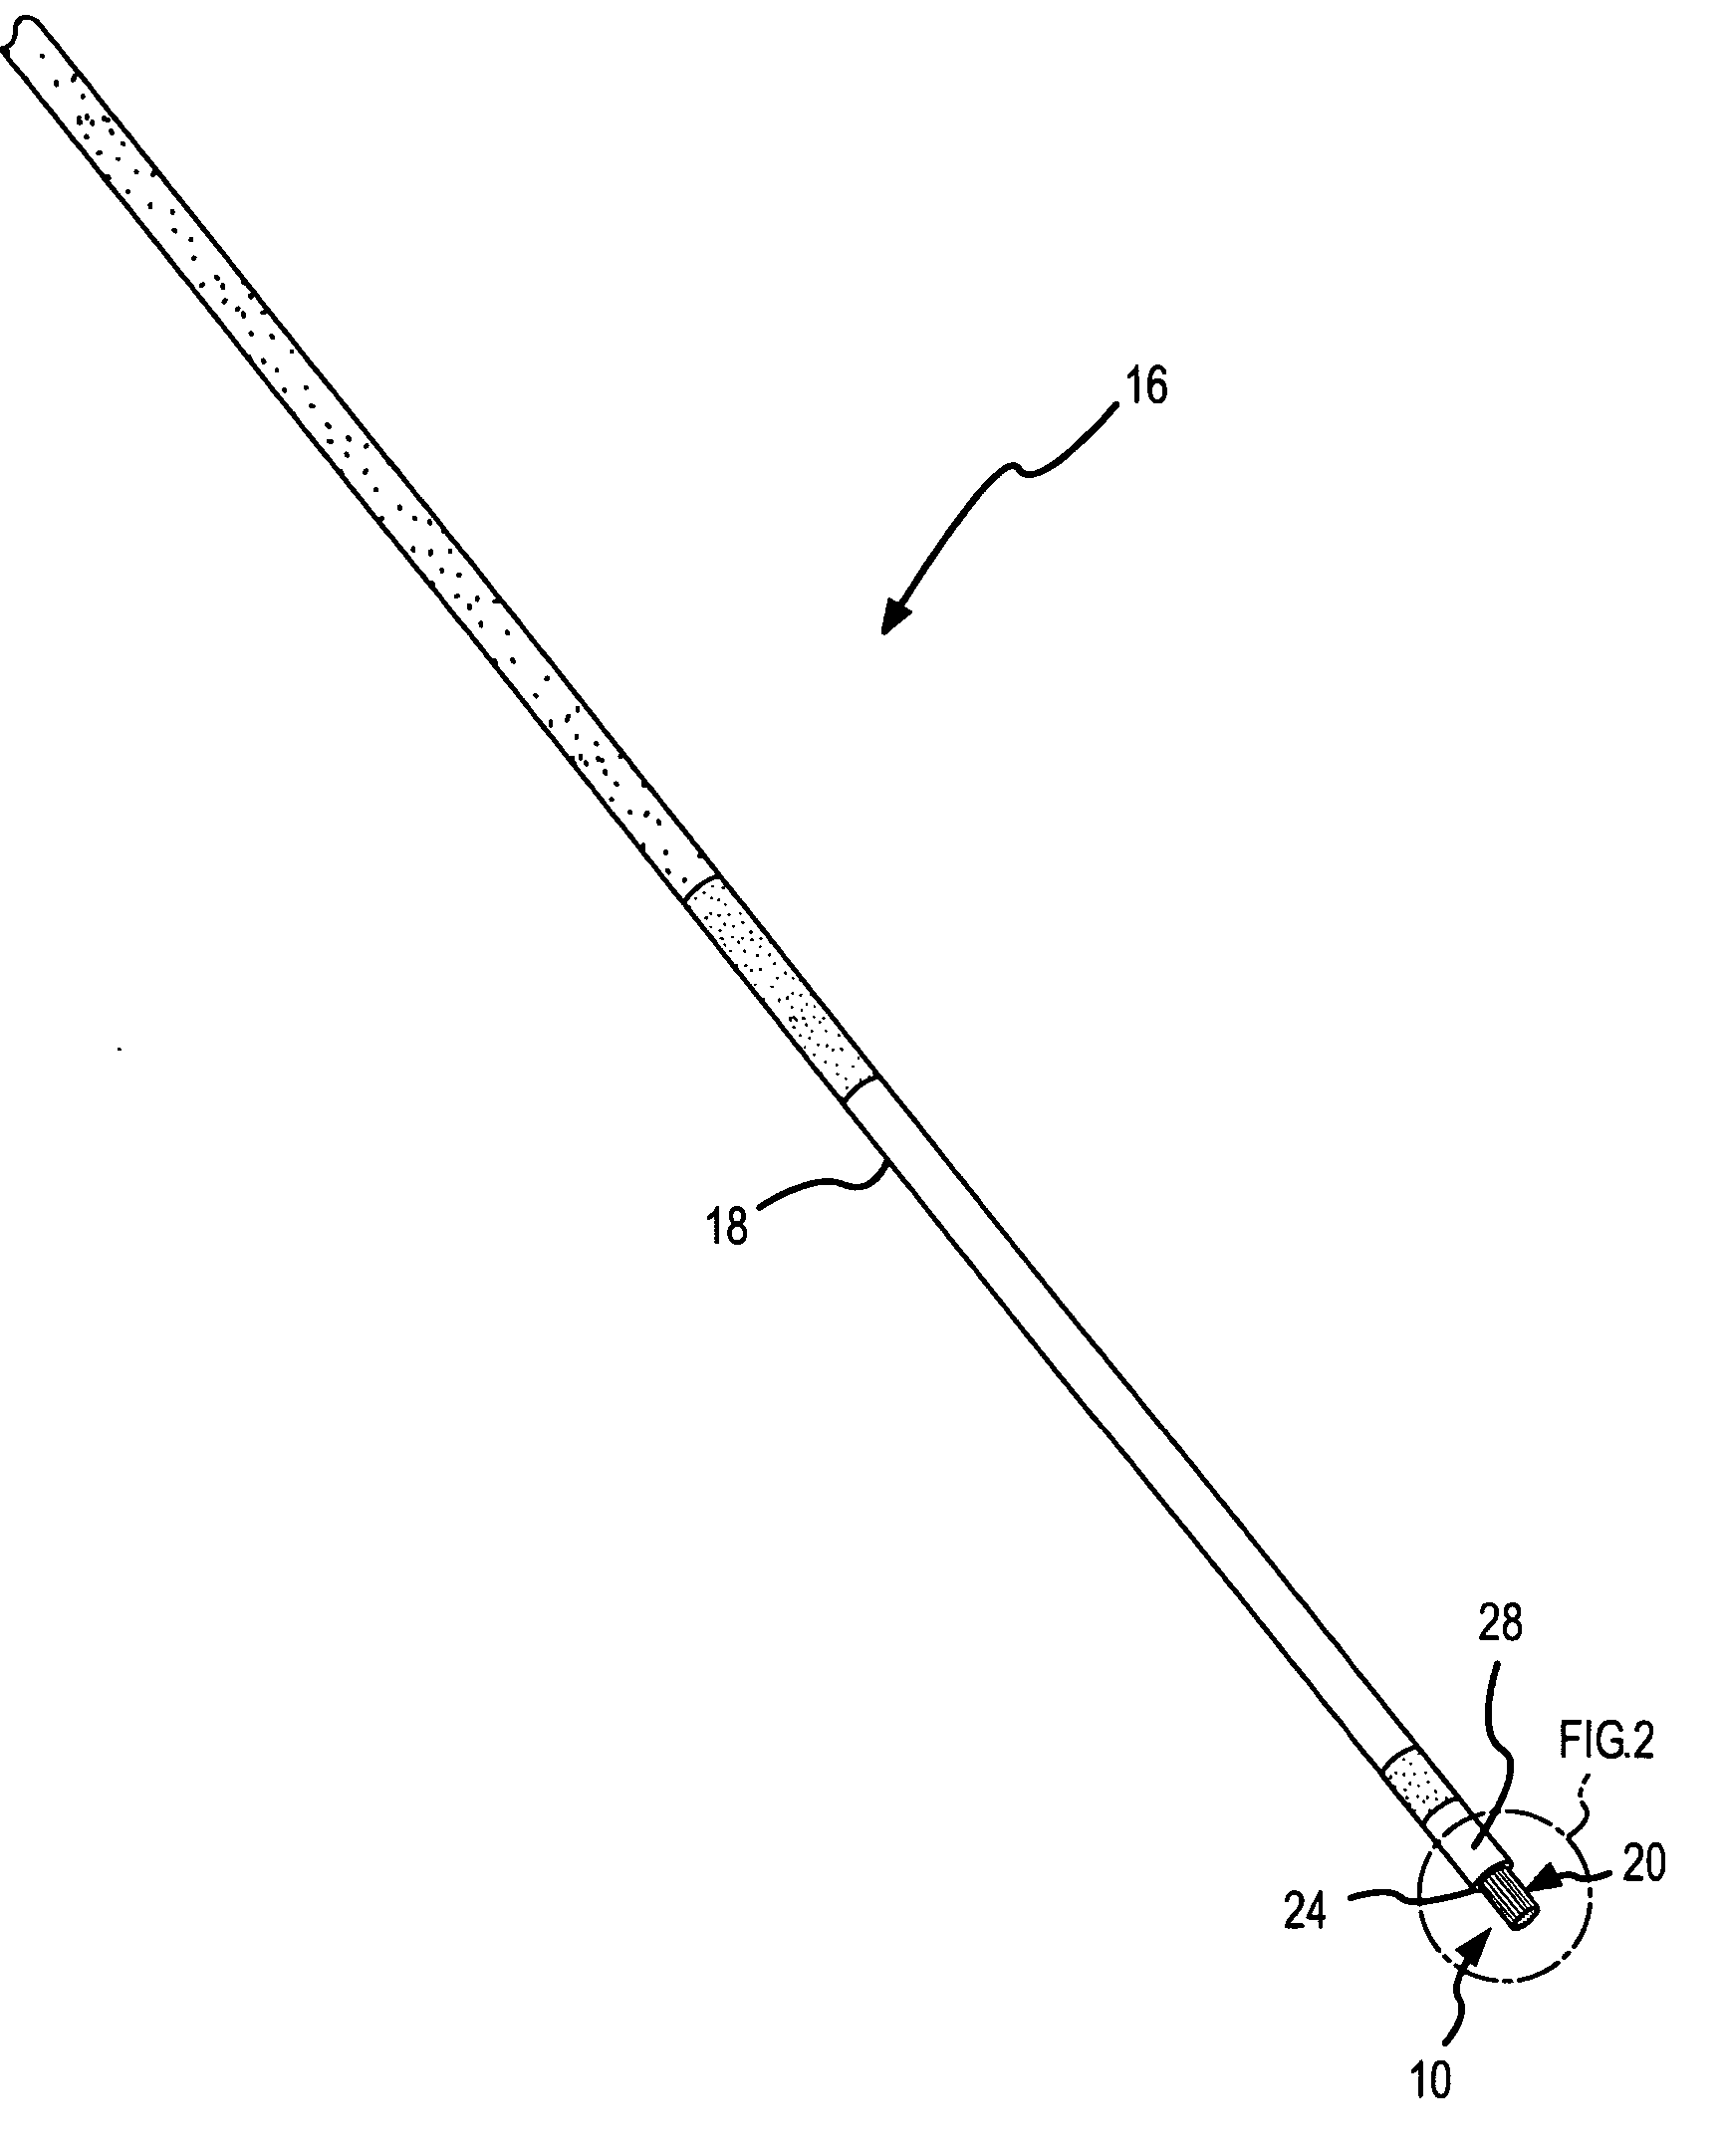 Conforming-electrode catheter and method for ablation